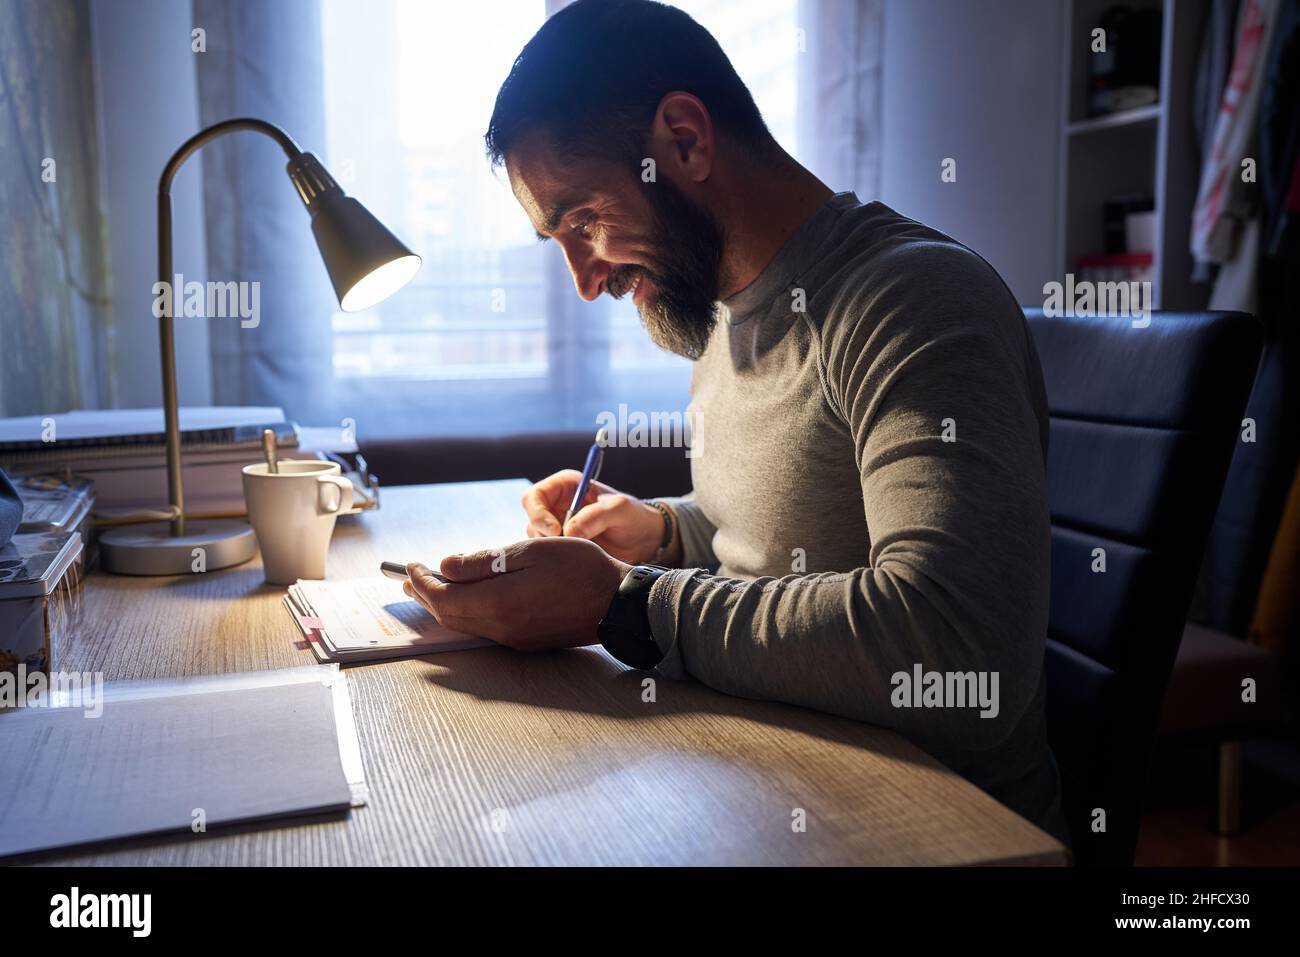 Young white man with a neat beard studying and looking at the phone at his desk Stock Photo